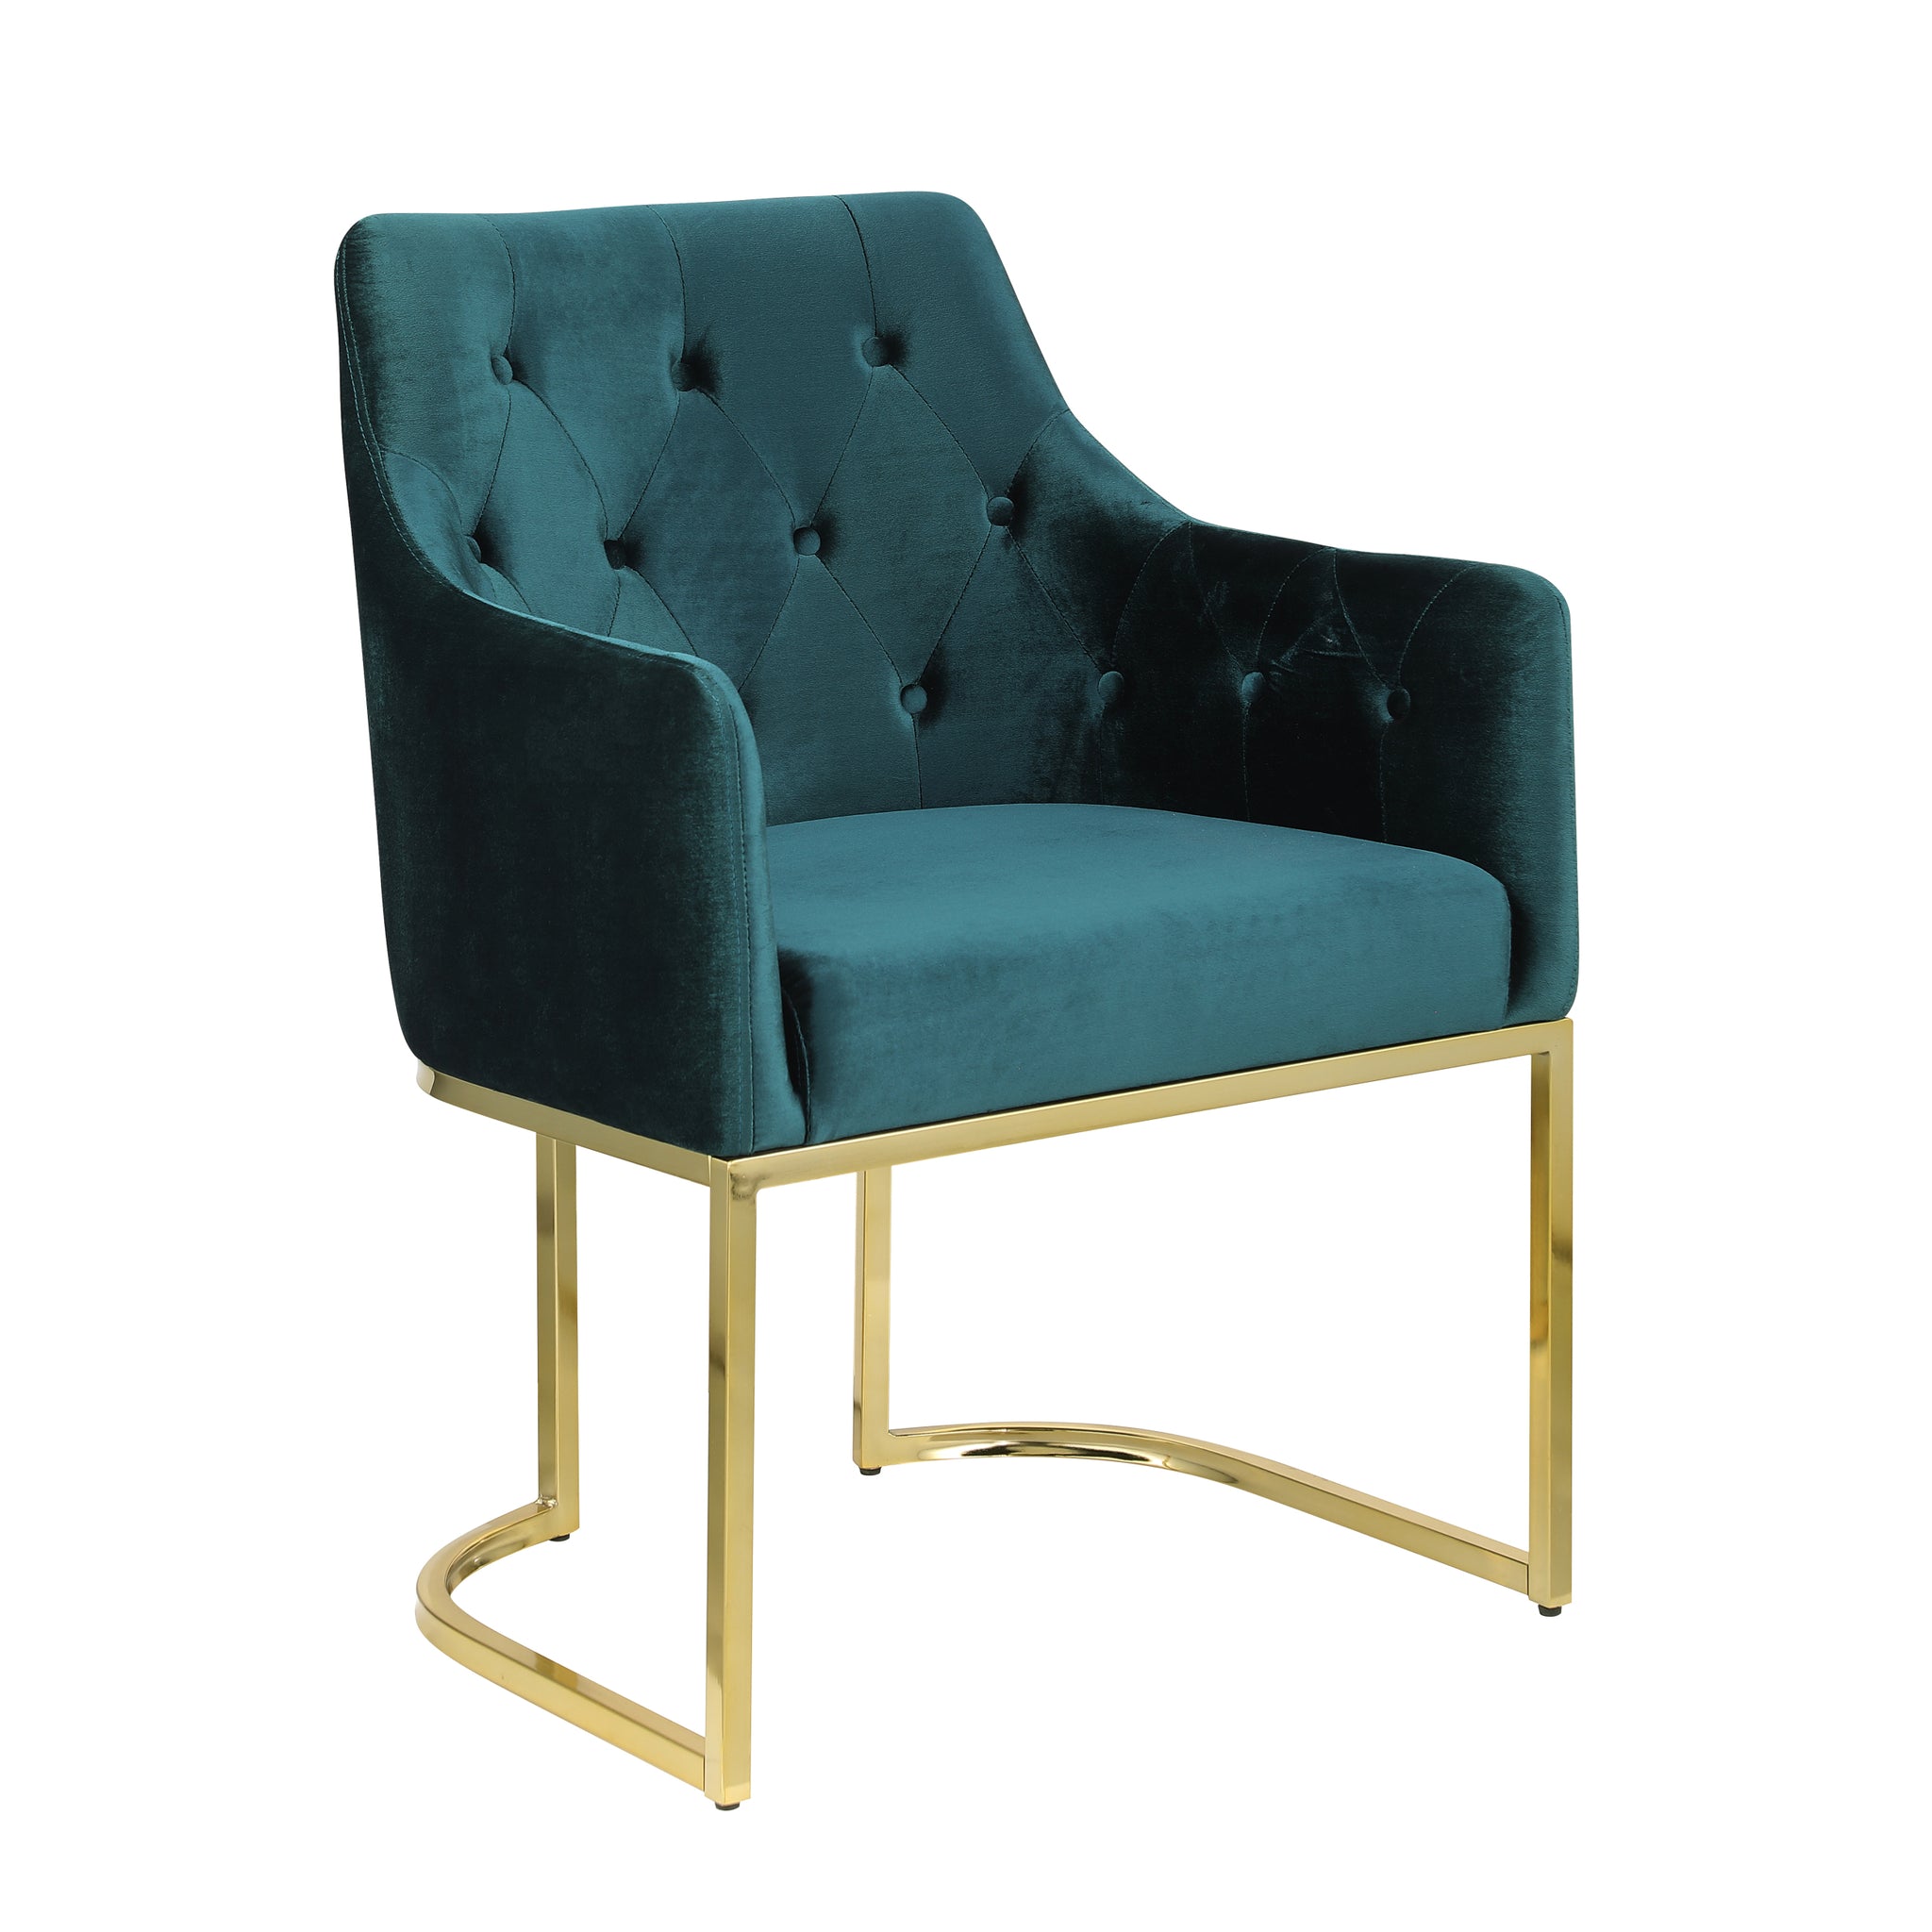 LOZENGE PLAID GOLD BASE ACCENT CHAIR blue-primary living